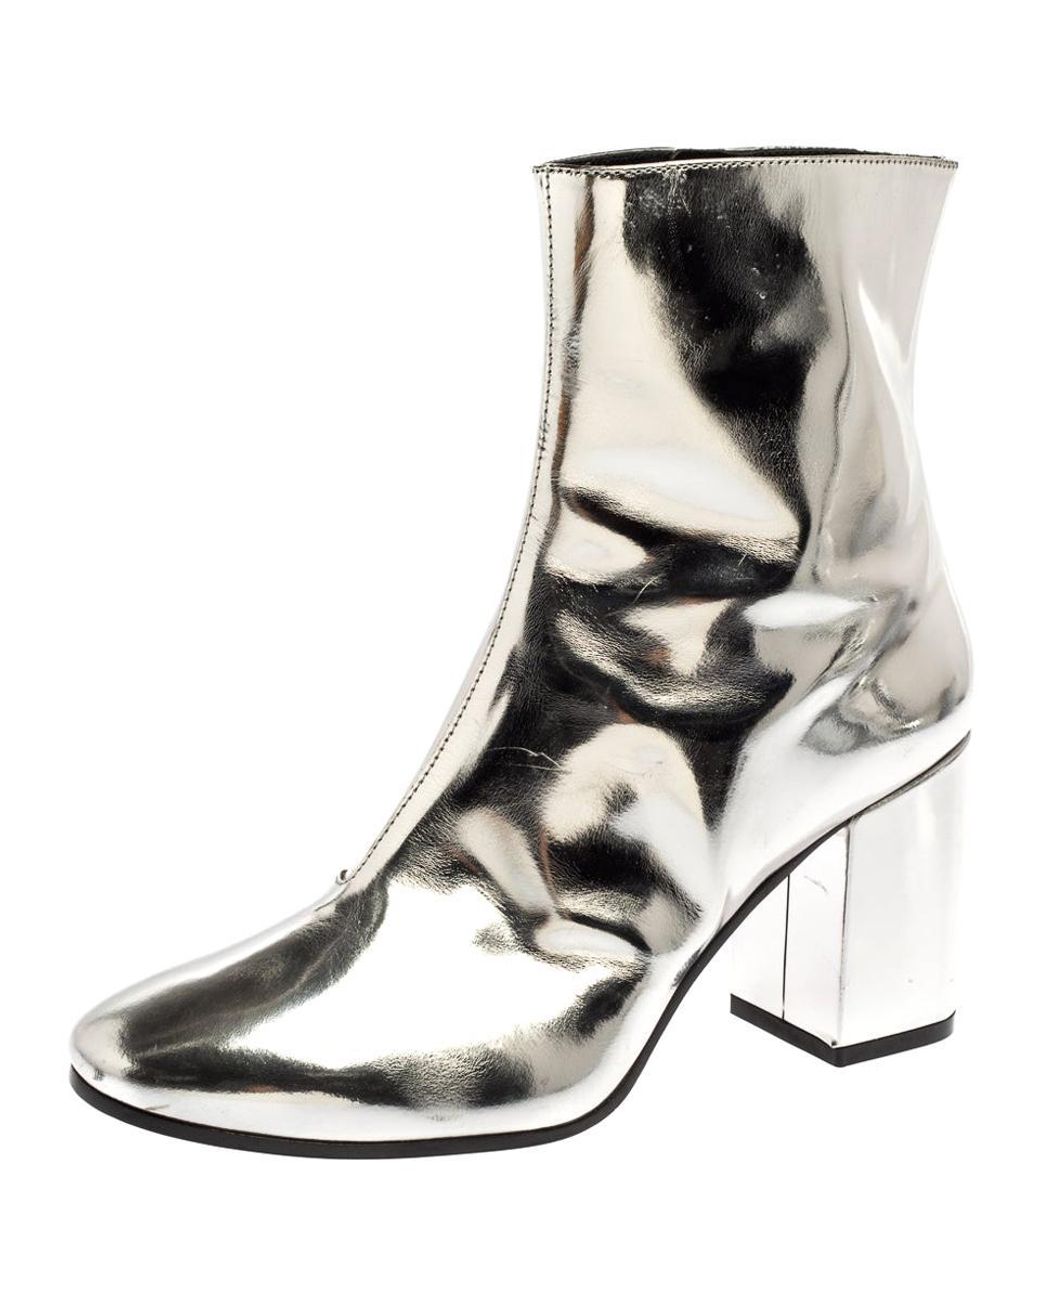 Balenciaga Metallic Patent Leather Ankle Boots Size 37 - Lyst